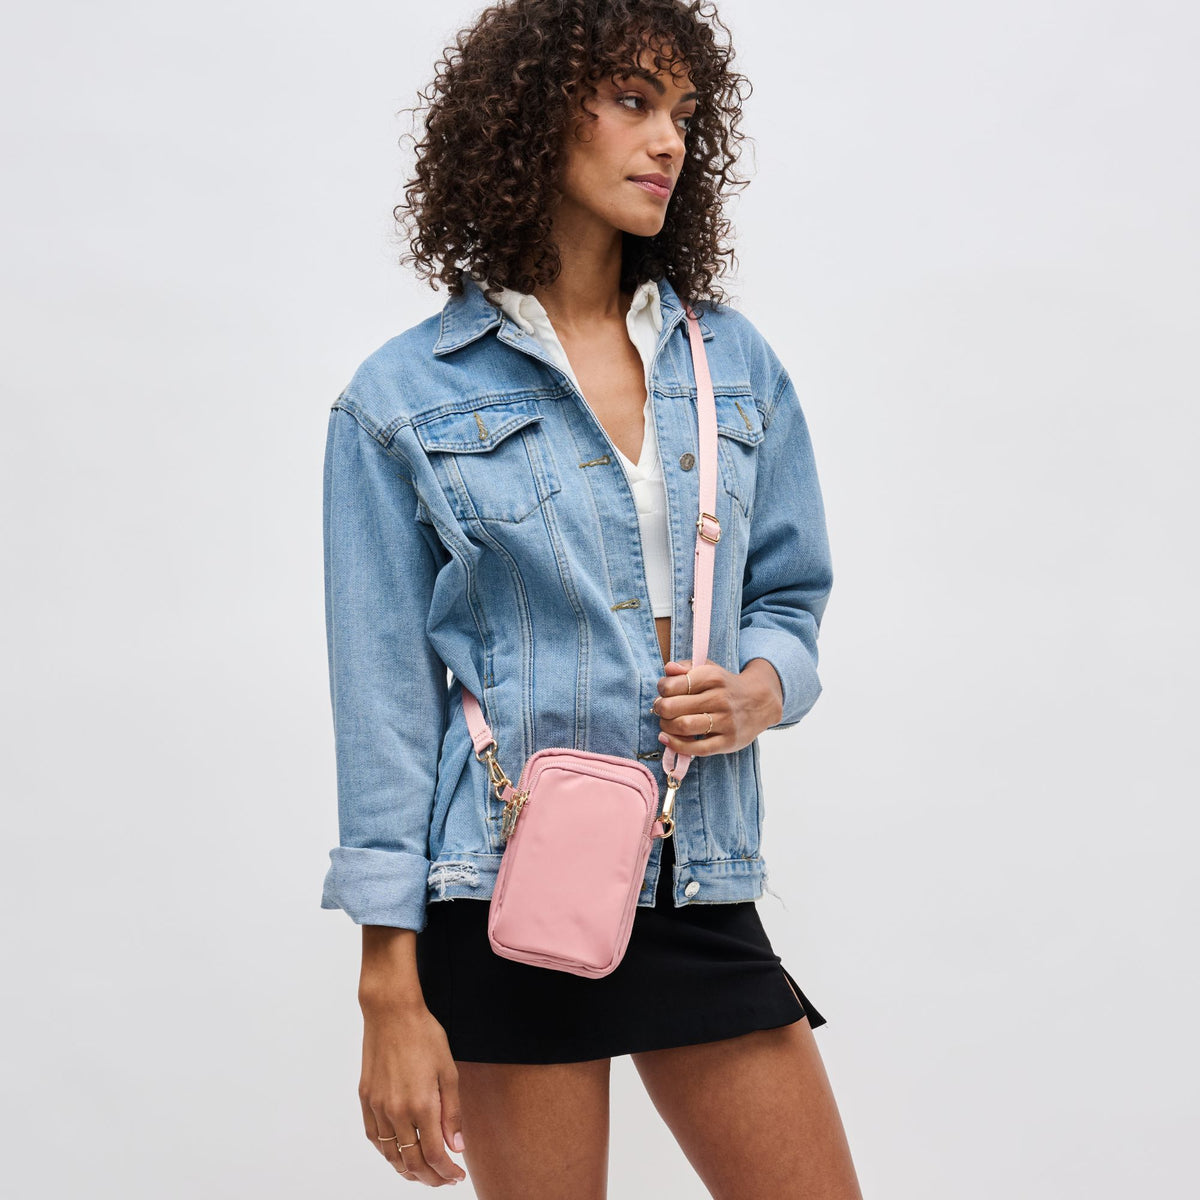 Woman wearing Pastel Pink Sol and Selene Divide & Conquer Crossbody 841764106658 View 1 | Pastel Pink